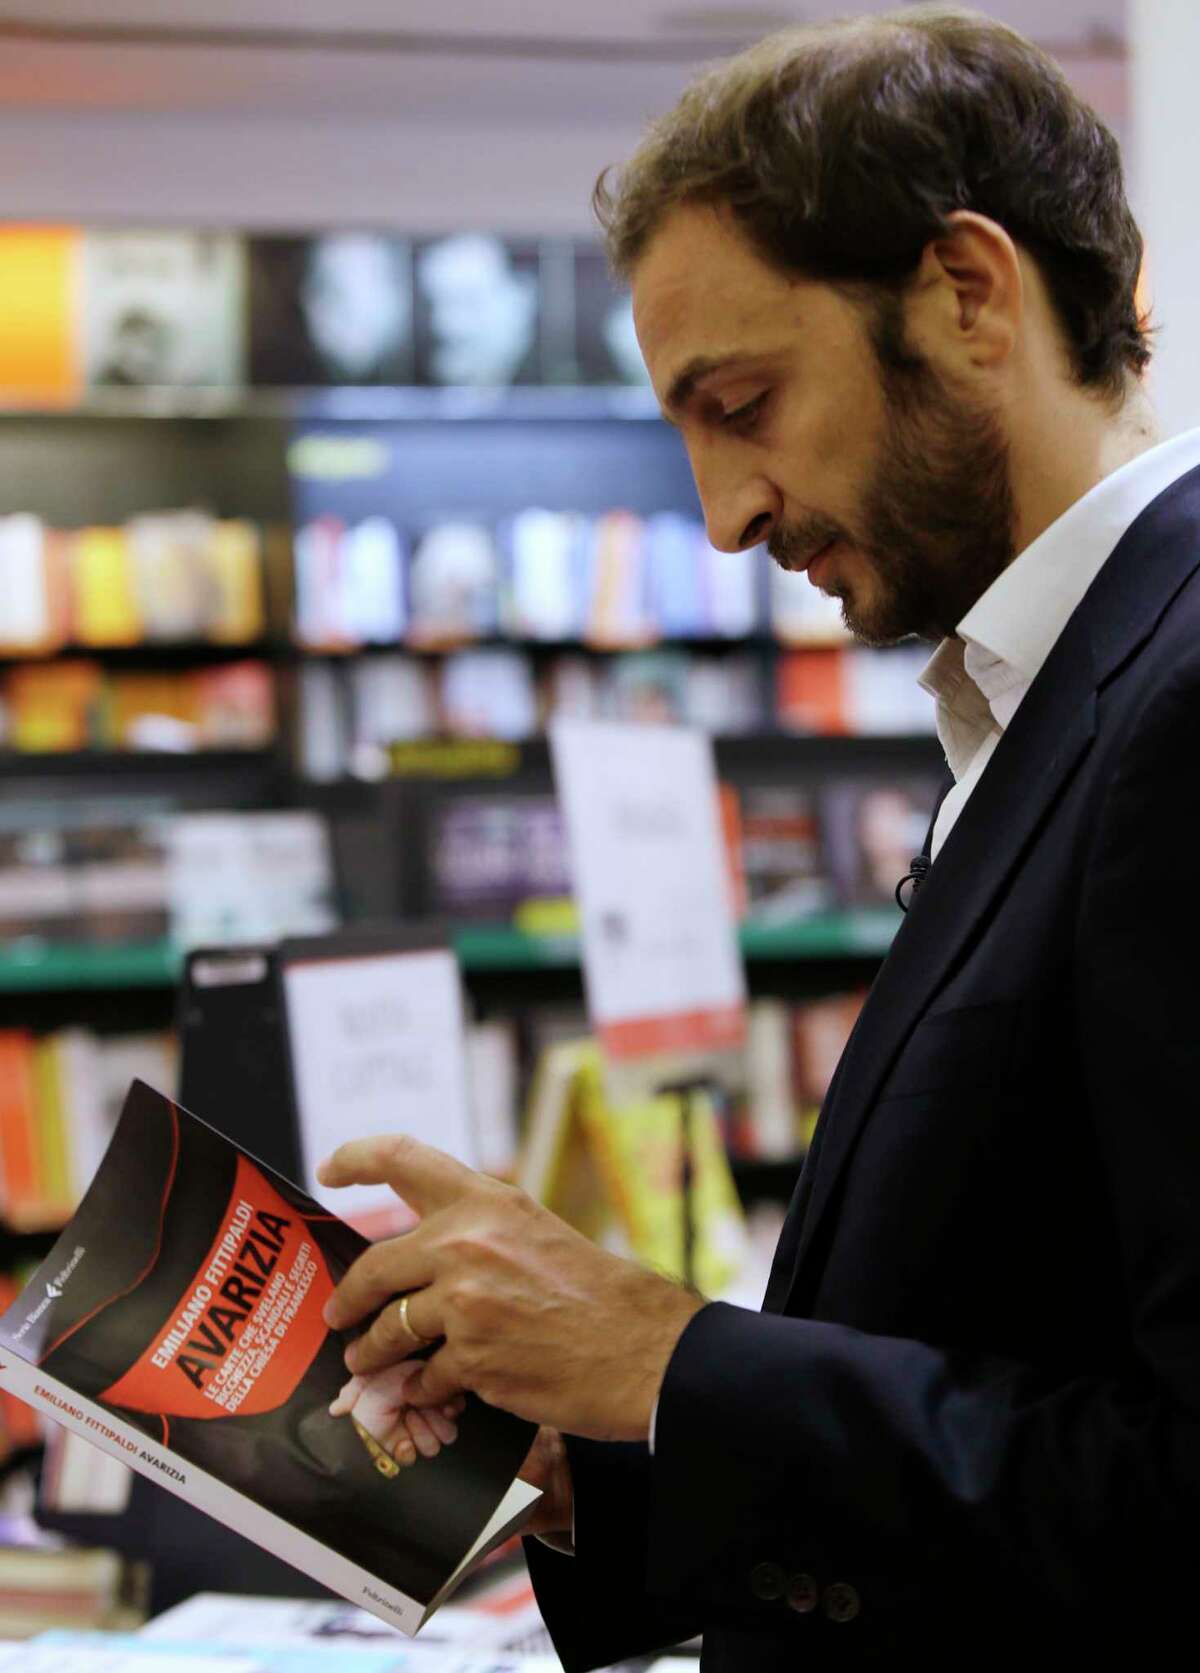 Italian journalist Emiliano Fittipaldi browses through his book titled " Avarice" during an interview with The Associated Press, in a Rome's bookstore, Tuesday, Nov. 3, 2015. The Vatican's new leaks scandal intensified Tuesday with two books detailing the mismanagement and internal resistance that is thwarting Pope Francis' financial reform efforts: 'Avarice' by L'Espresso Vatican reporter Emiliano Fittipaldi and 'Merchants in the Temple' by Italian journalist Gianluigi Nuzzi. (AP Photo/Gregorio Borgia)